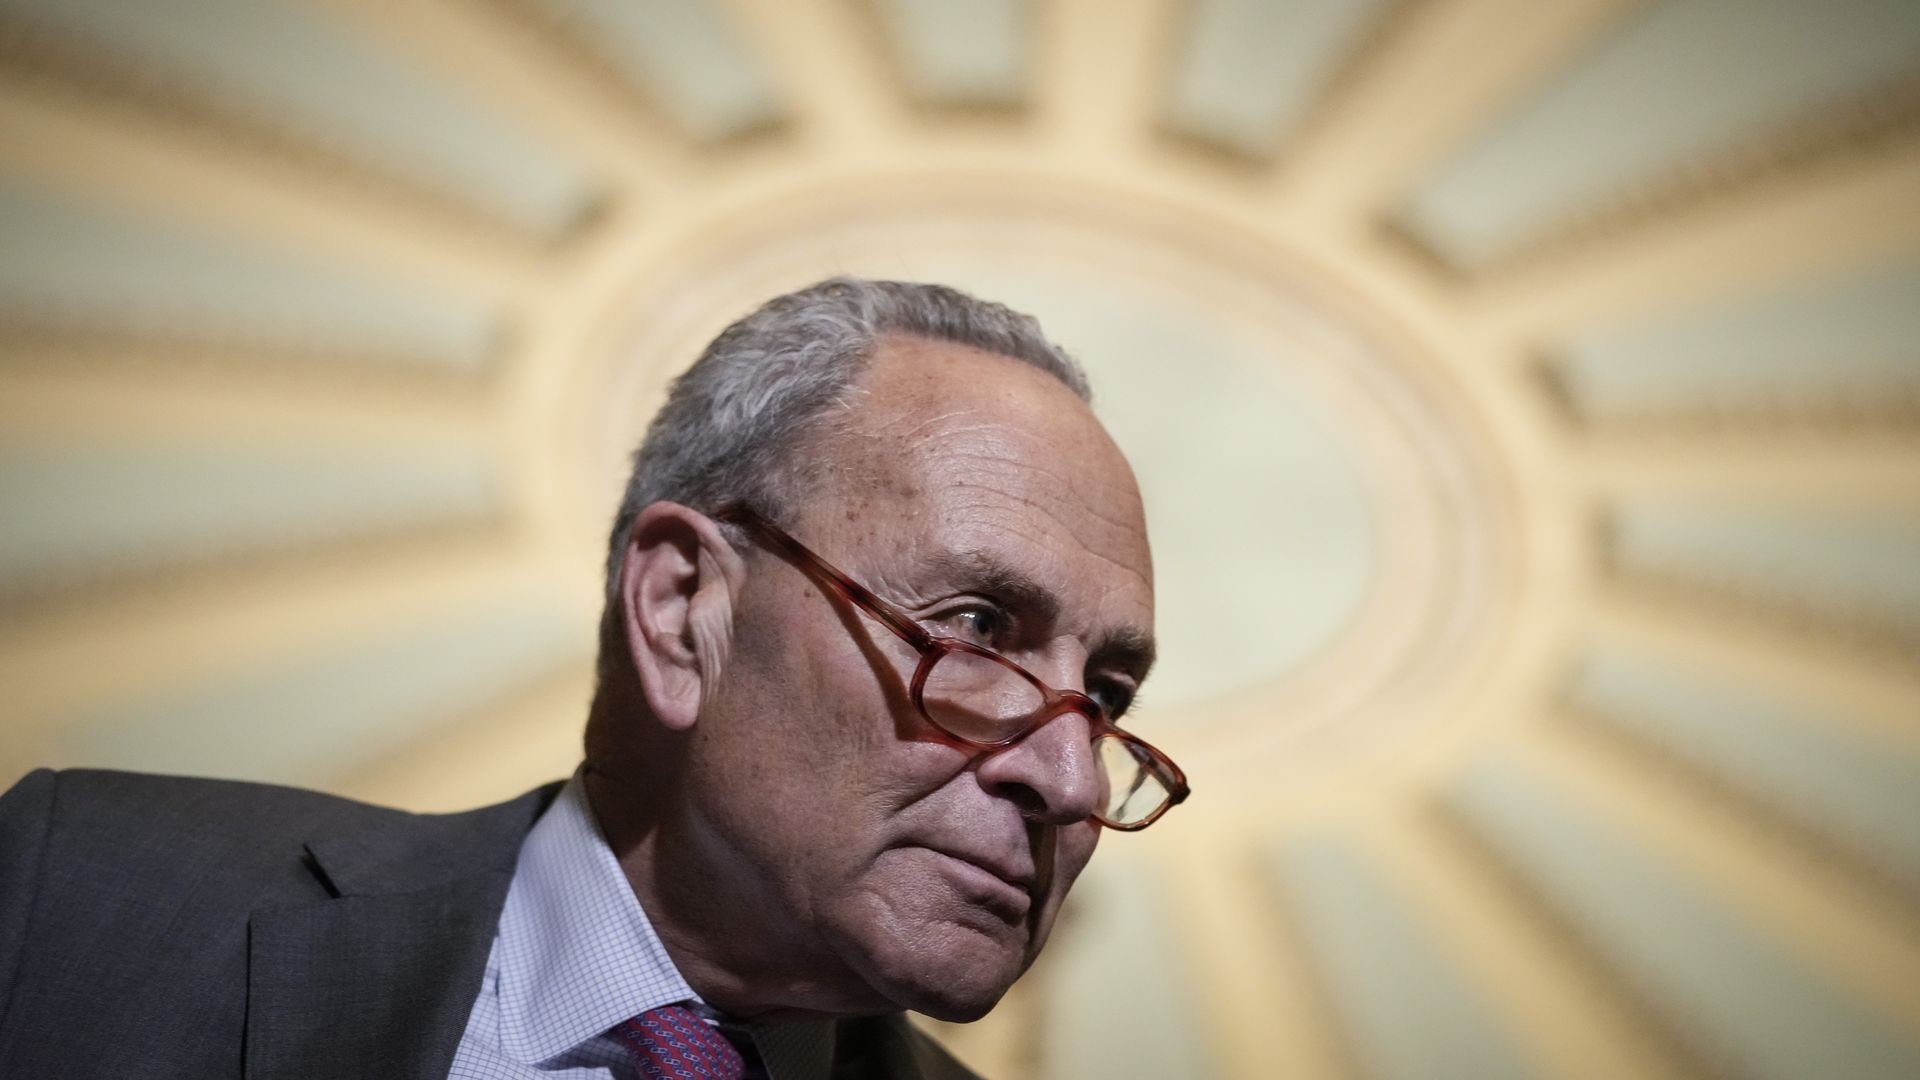 Senate Majority Leader Chuck Schumer (D-NY) speaks to reporters after a closed-door lunch meeting with Senate Democrats at the U.S. Capitol May 24, 2022